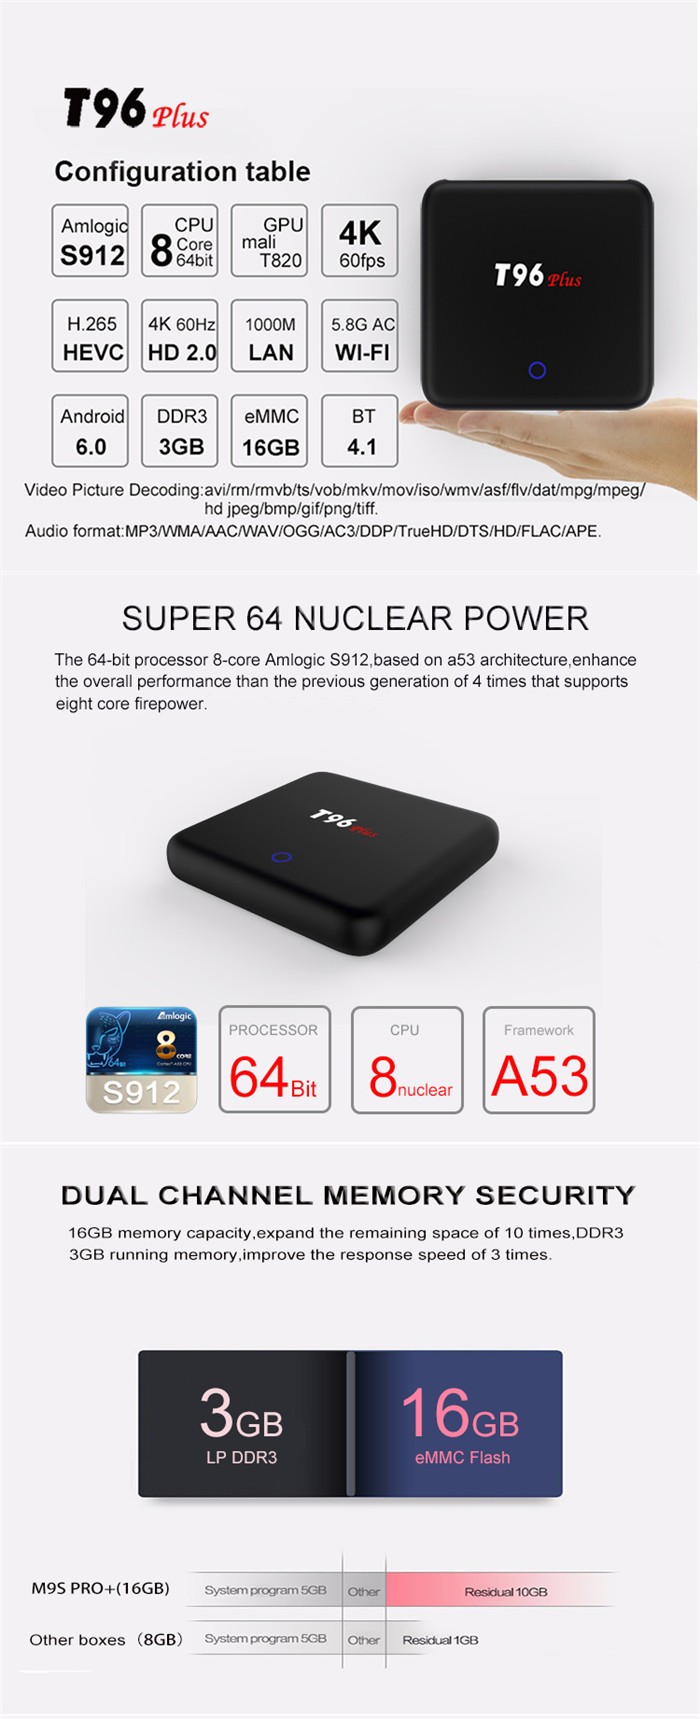 T96 PLUS S912 3G+16G Android 6.0 Marshmallow with Kodi16.1 TV Box Touch Power Button with Circuit Breathing Lamp